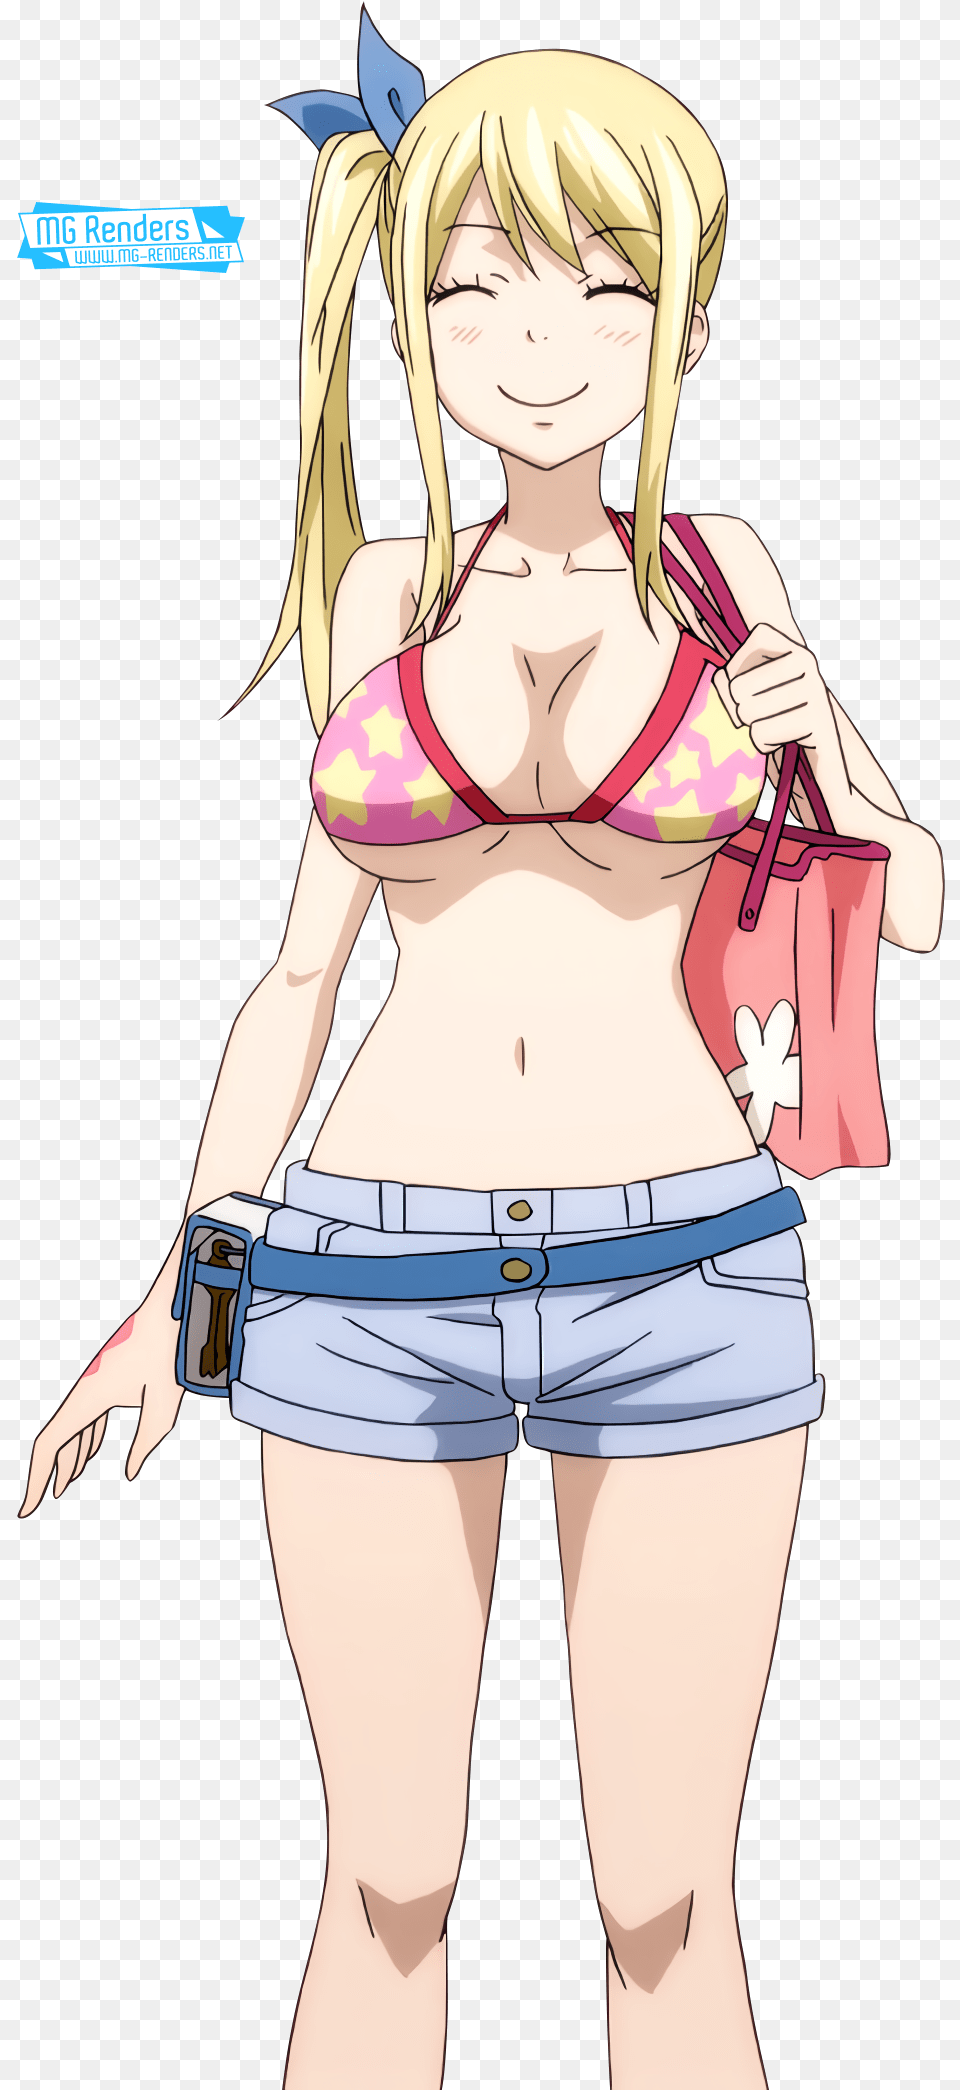 Fairy Tail Lucy Heartfilia Render 61 Anime Fairy Tail Lucy Ecchi, Book, Comics, Publication, Adult Png Image